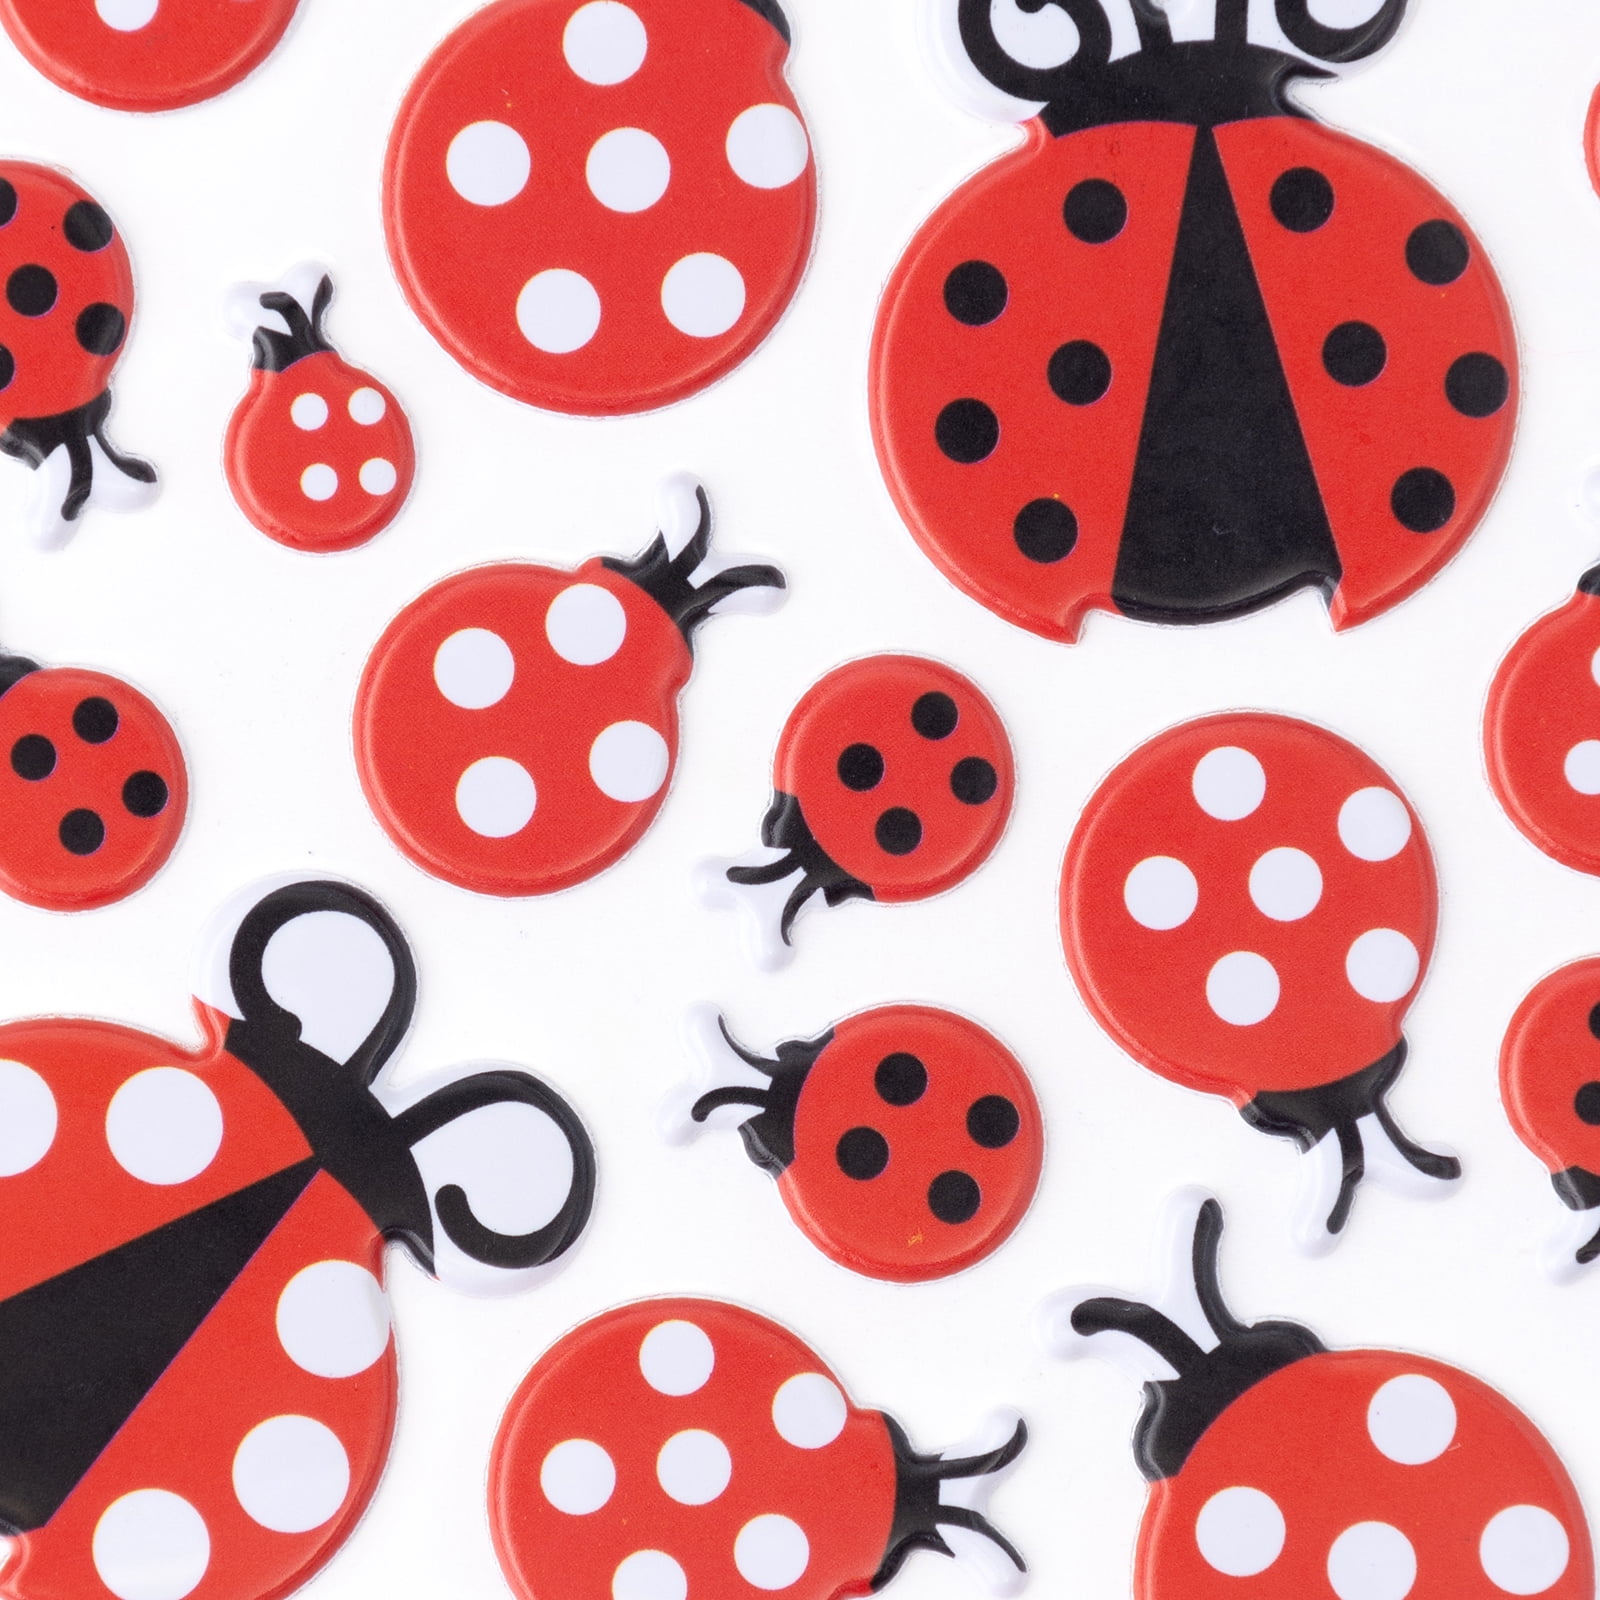 Sticko Classic Solid Multicolor Puffy Themed Ladybugs Plastic